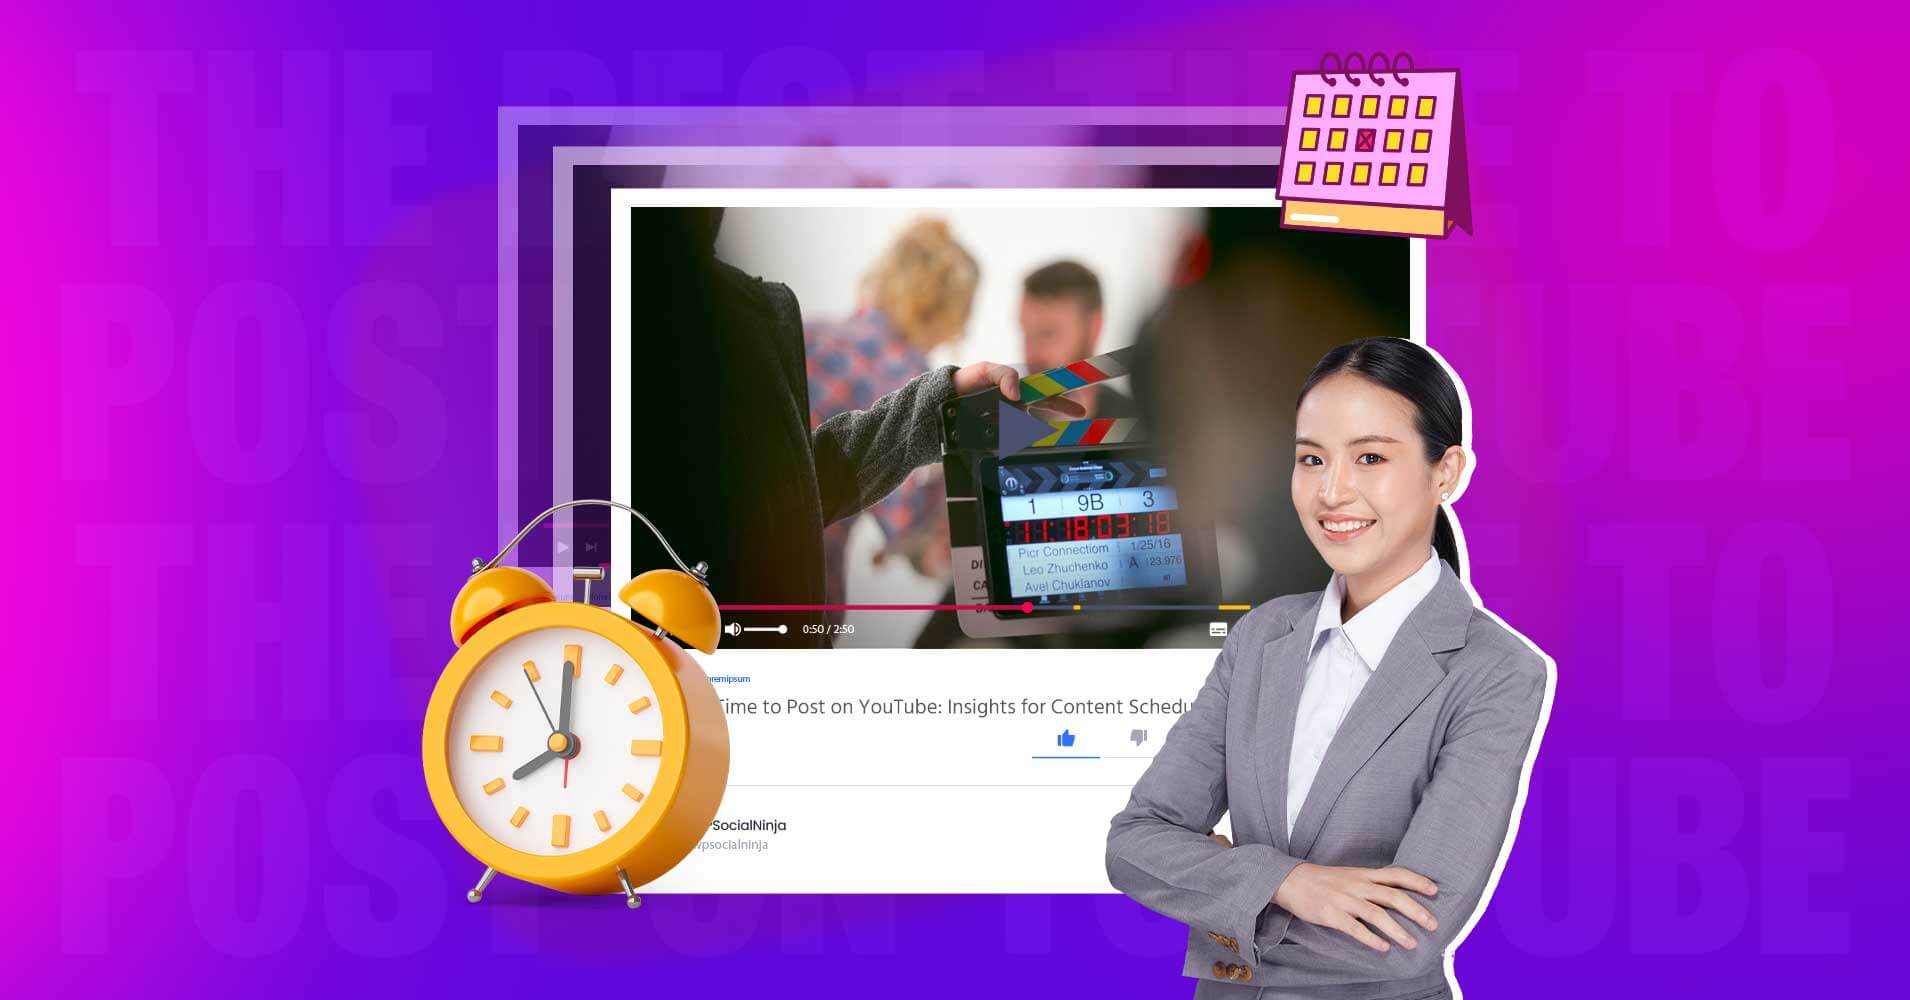 As YouTube algorithm acts like Google, it takes time to index and show videos. So it is important to know the best time to post on YouTube to get the maximum views.